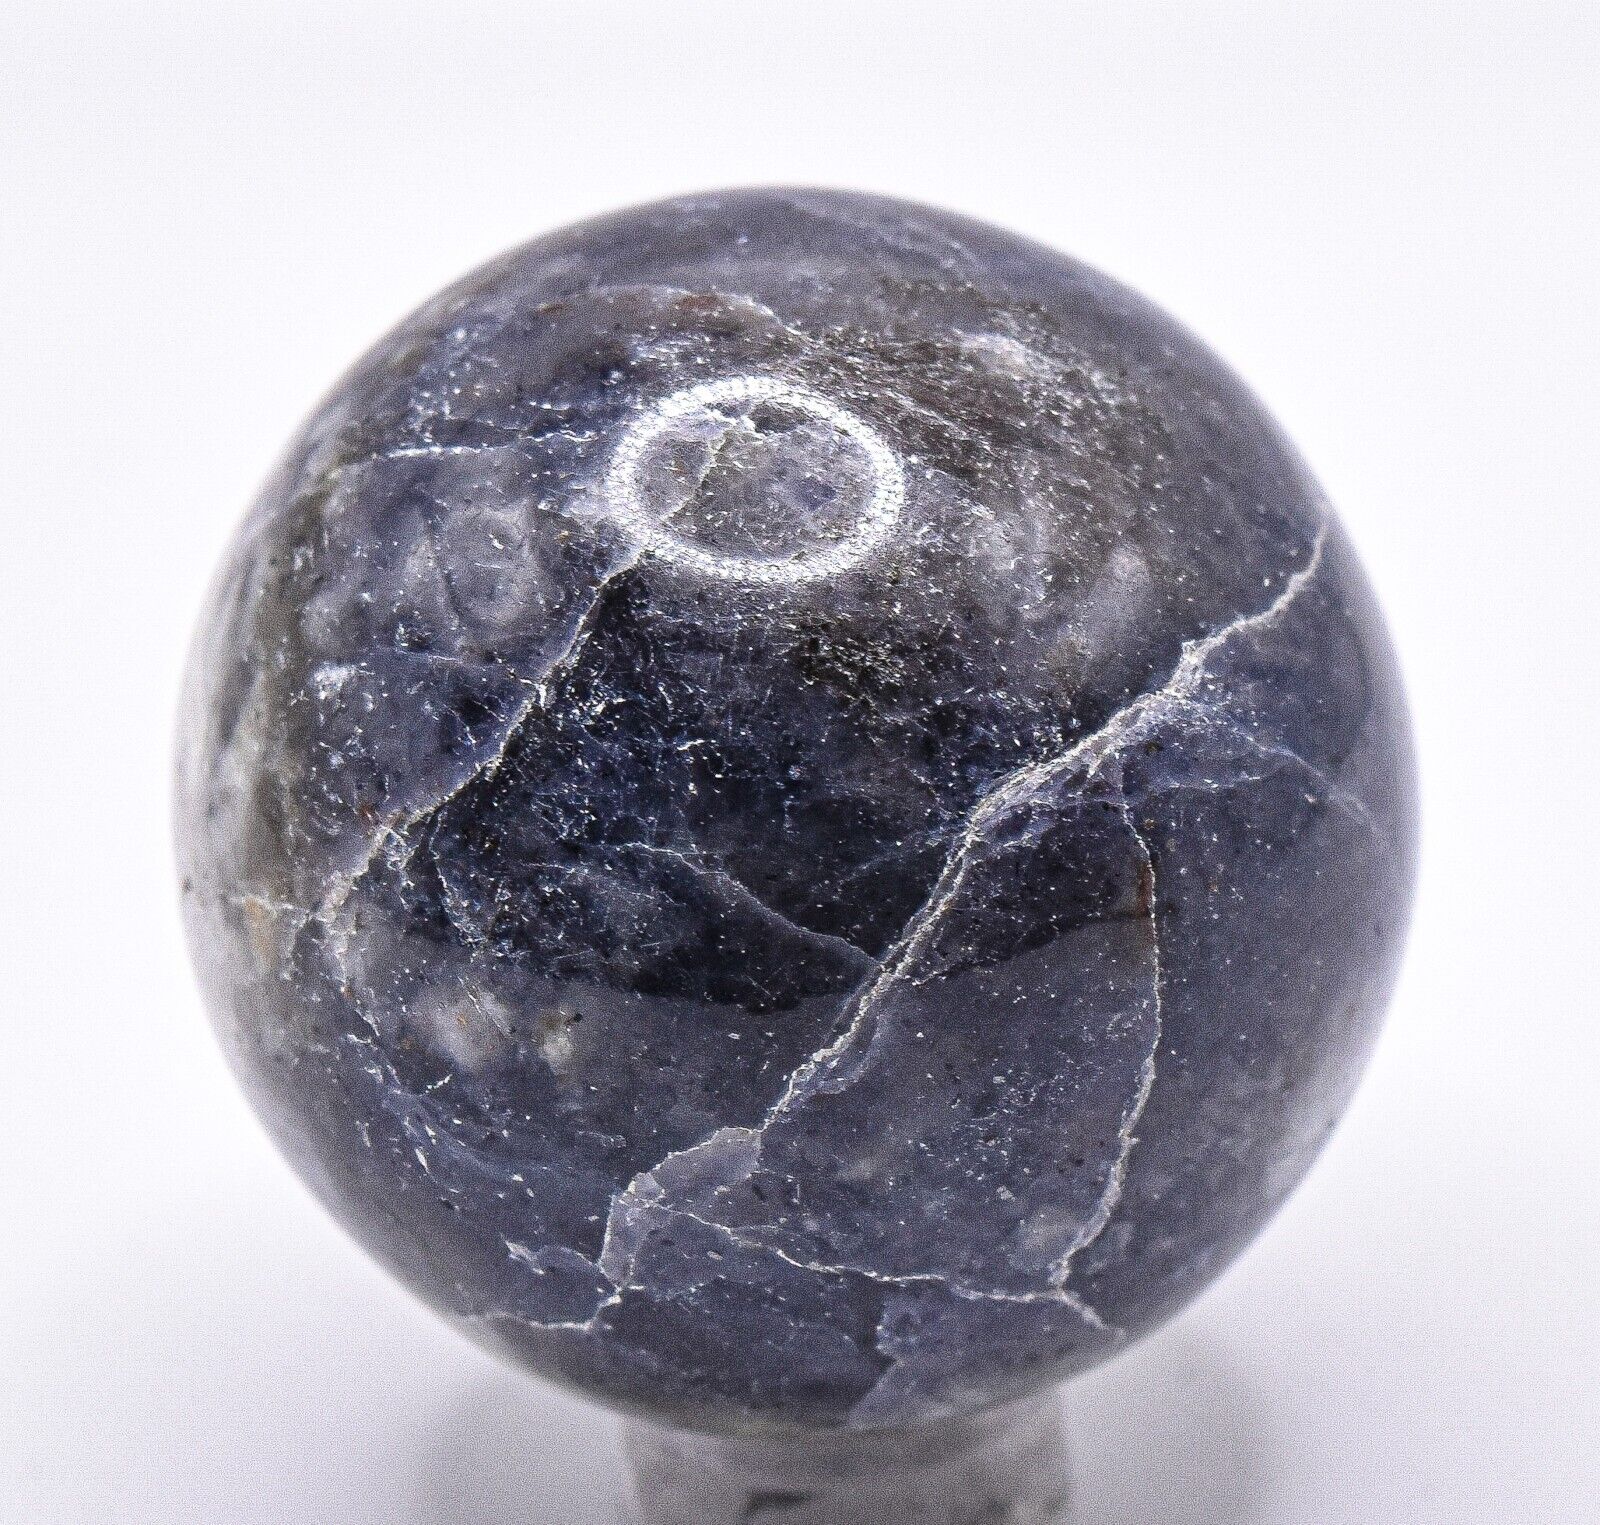 42mm Blue Iolite w/ Inclusions Sphere Polished Sparkling Crystal Mineral - India